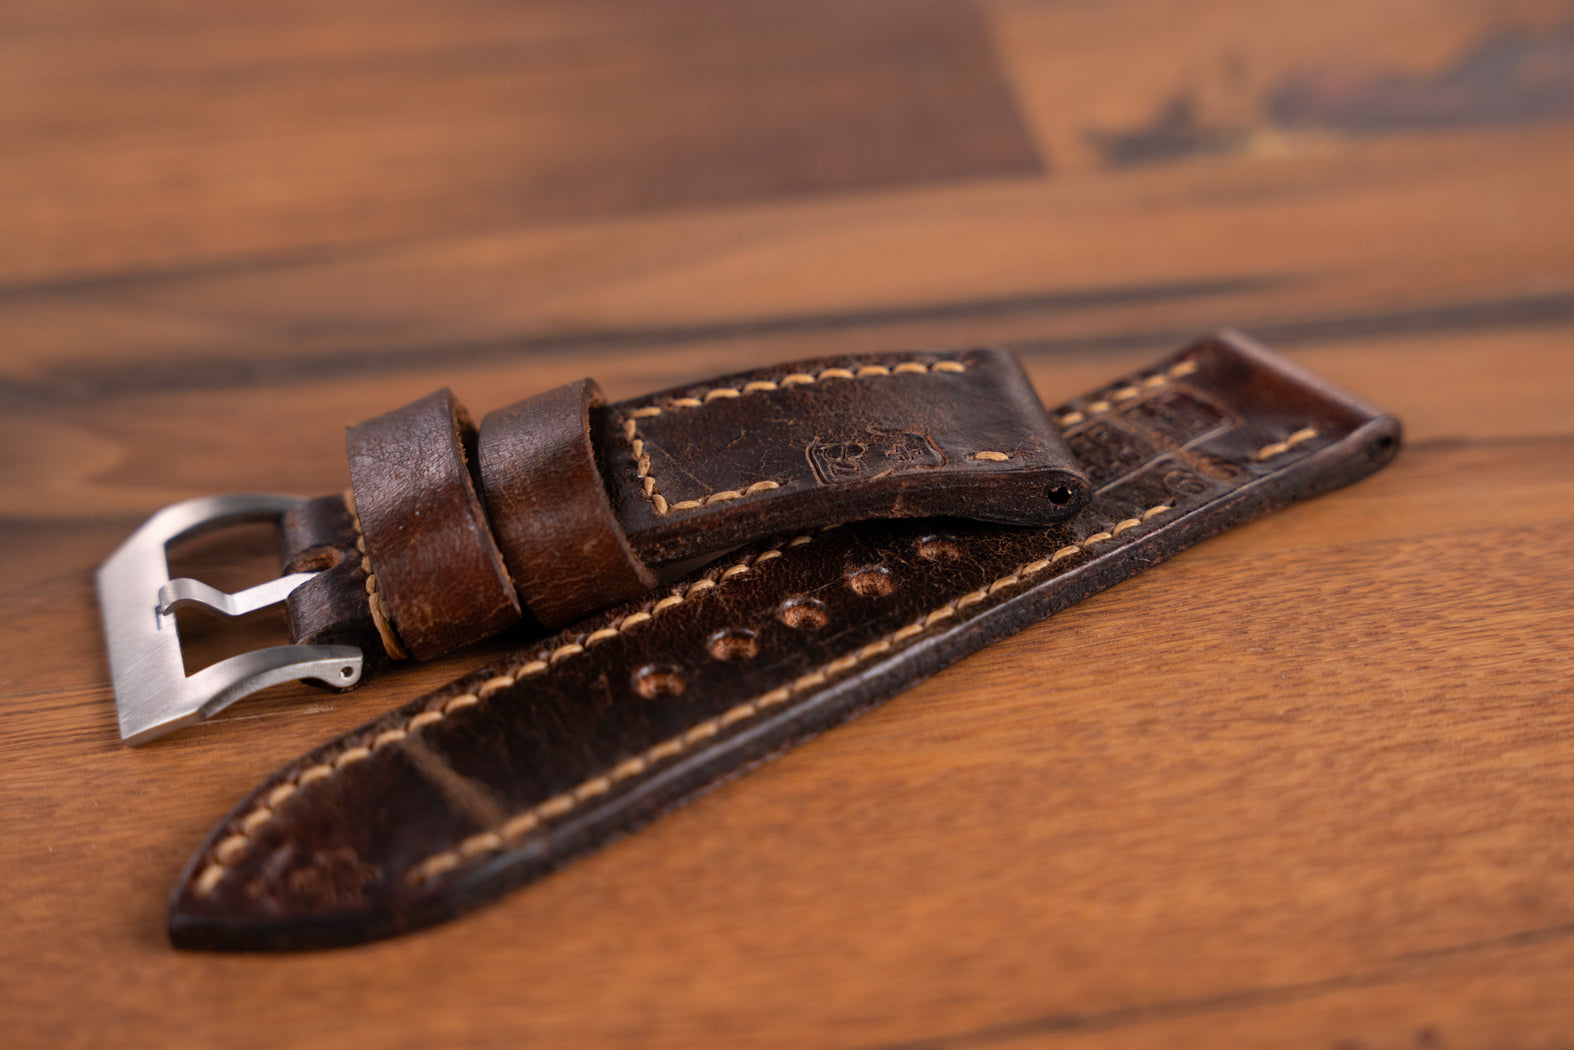 Ammo Watch Strap - 062 - In Stock!